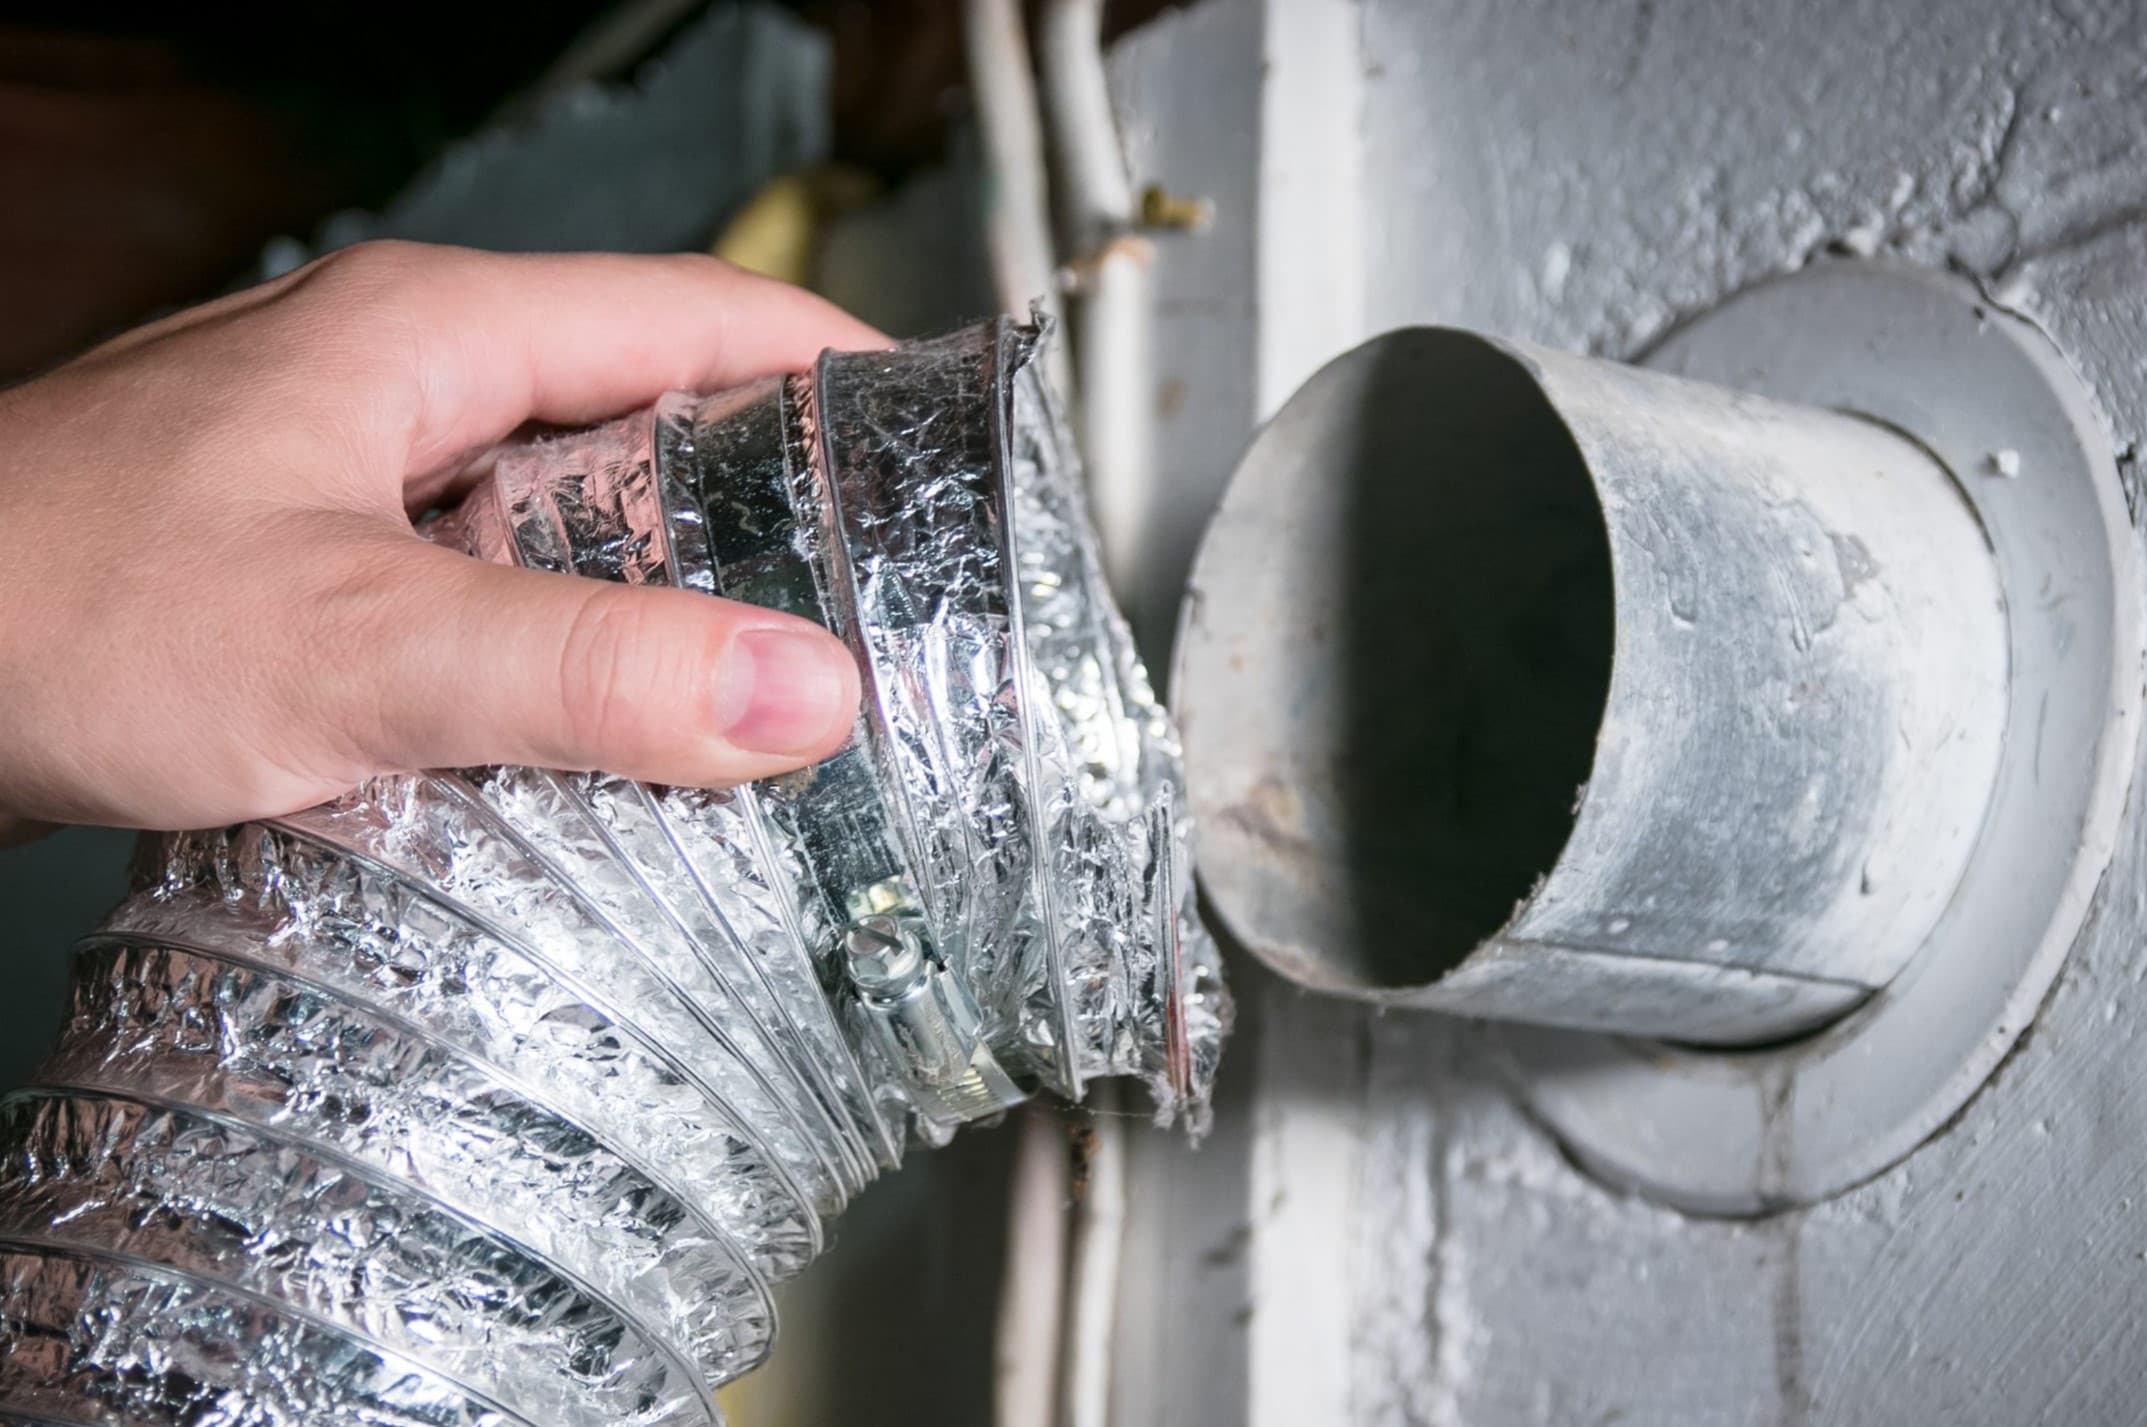 How To Unhook A Dryer Vent